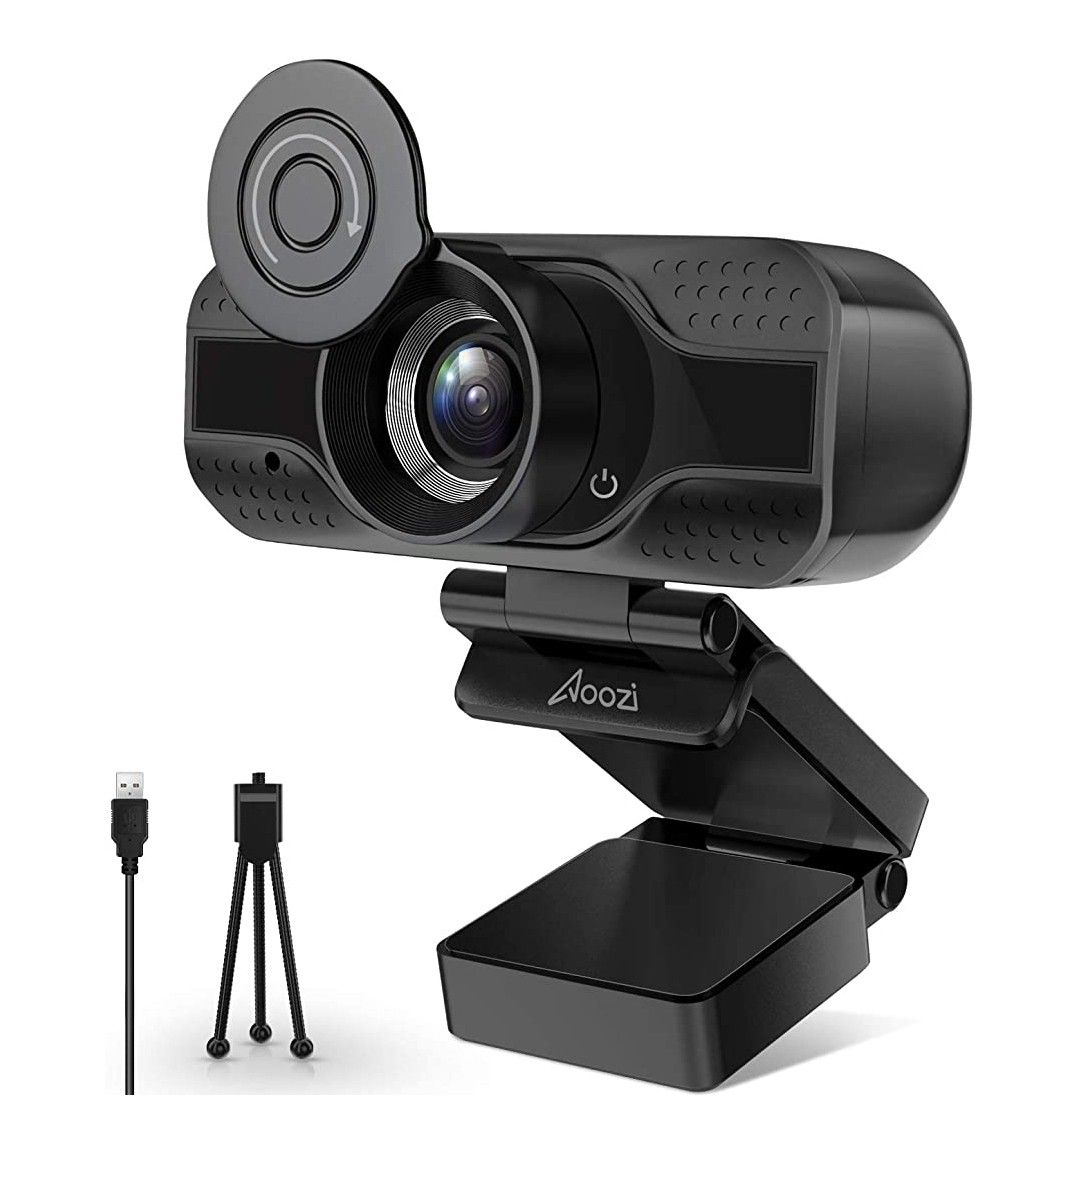 1080P HD USB Webcam with built in Microphone for Desktop or Laptop, Flexible Rotatable Clip and Tripod